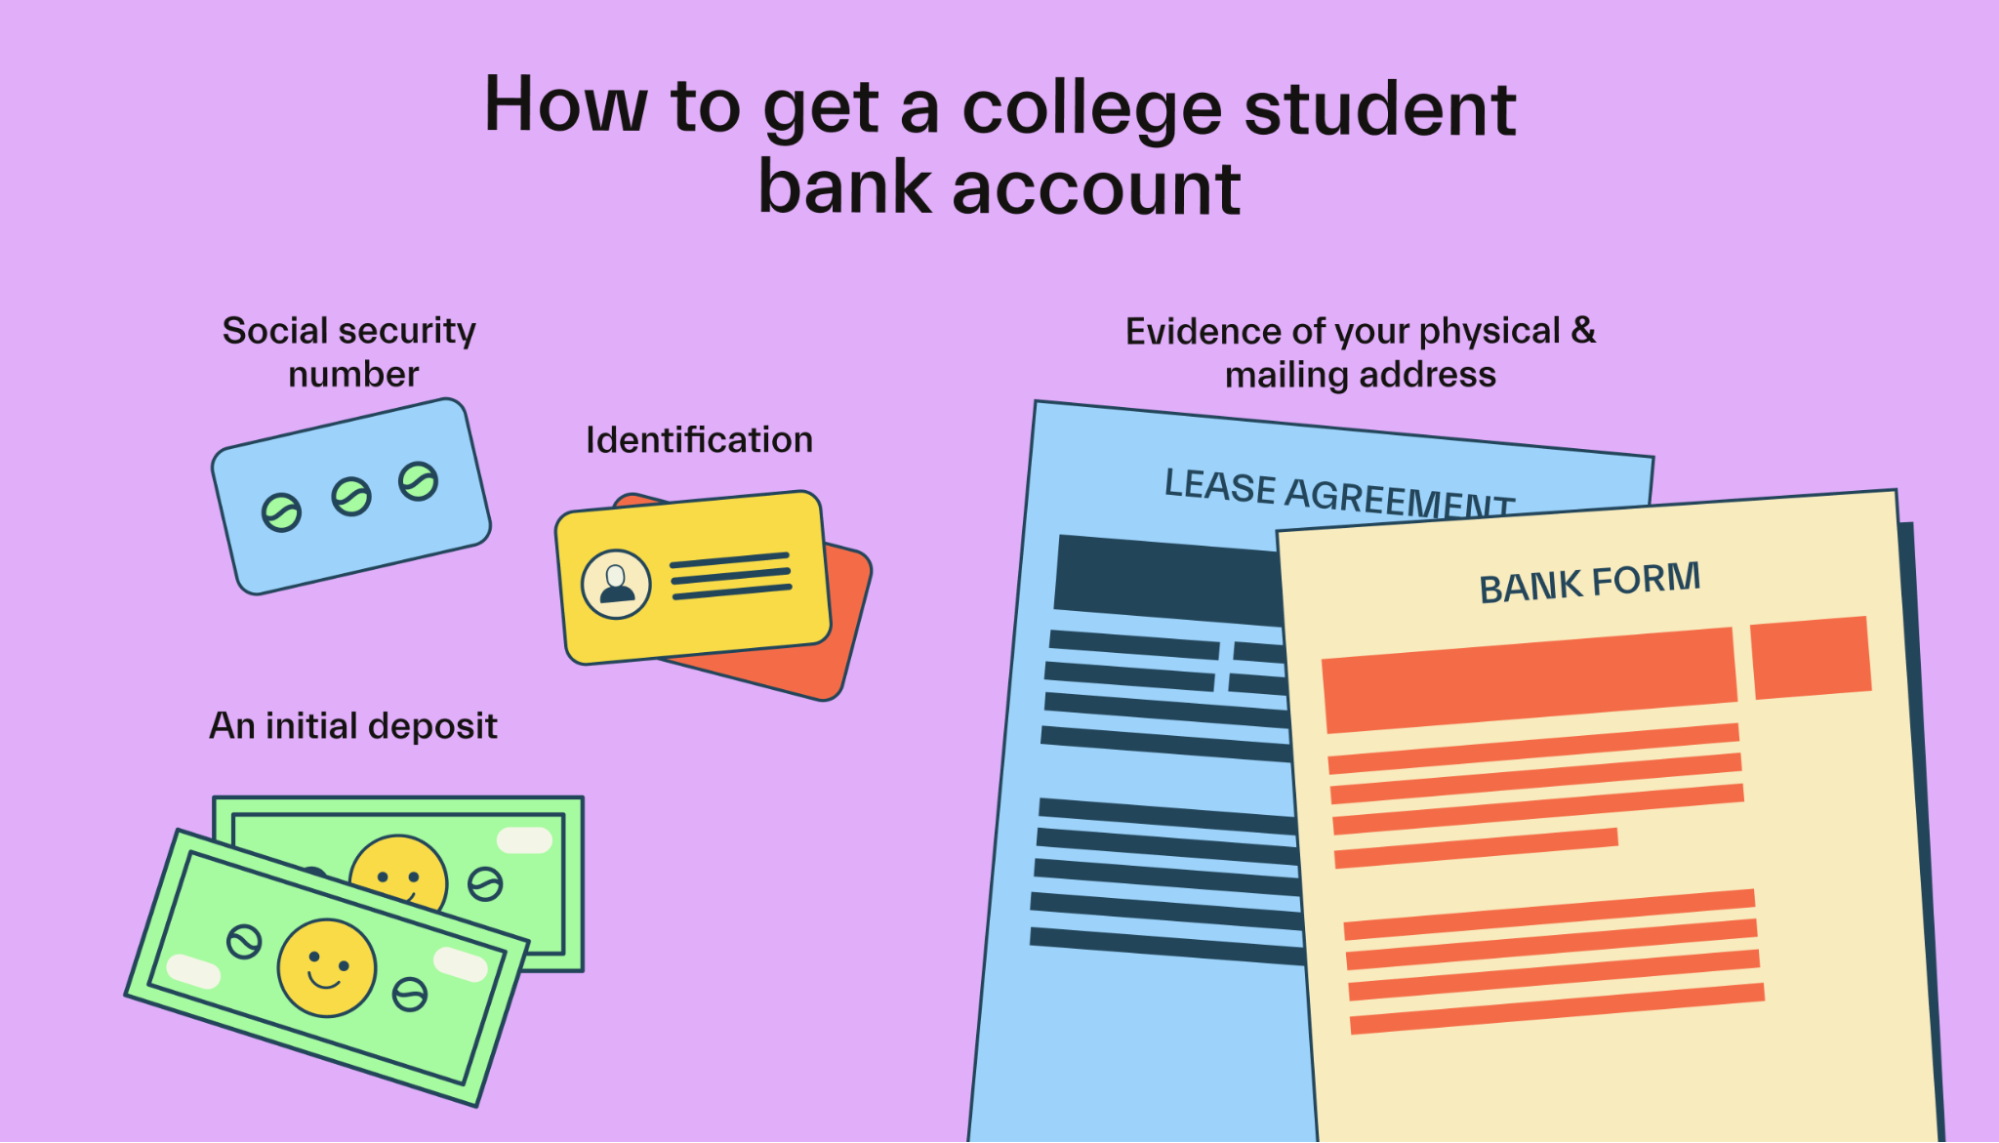 How to get a college student bank account